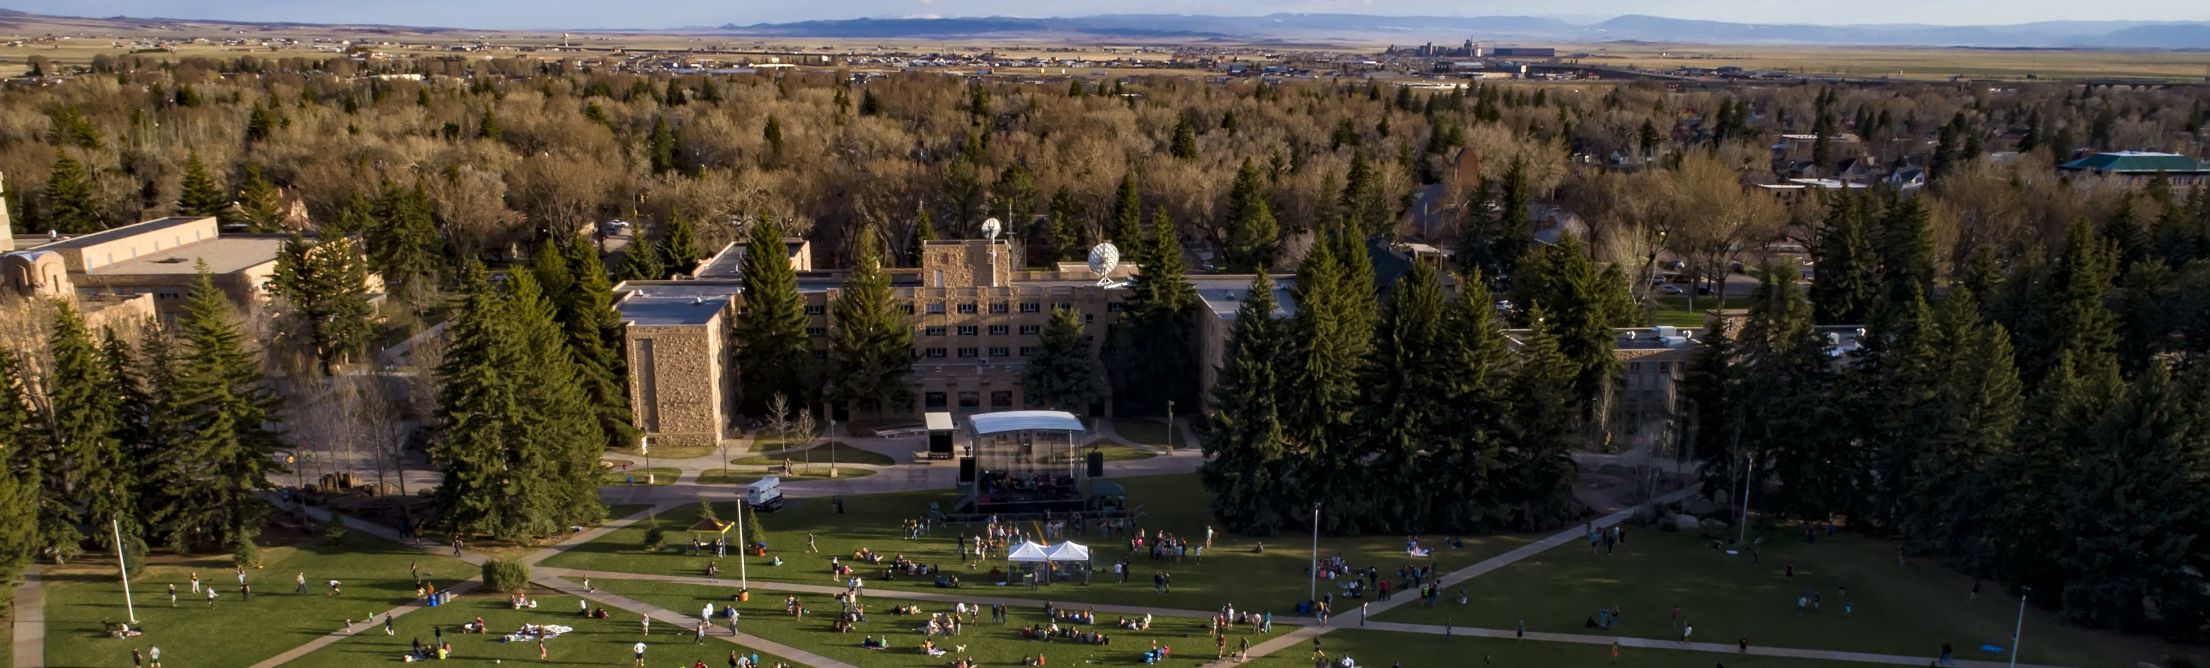 Picture of UW Campus Prexies Pasture from above